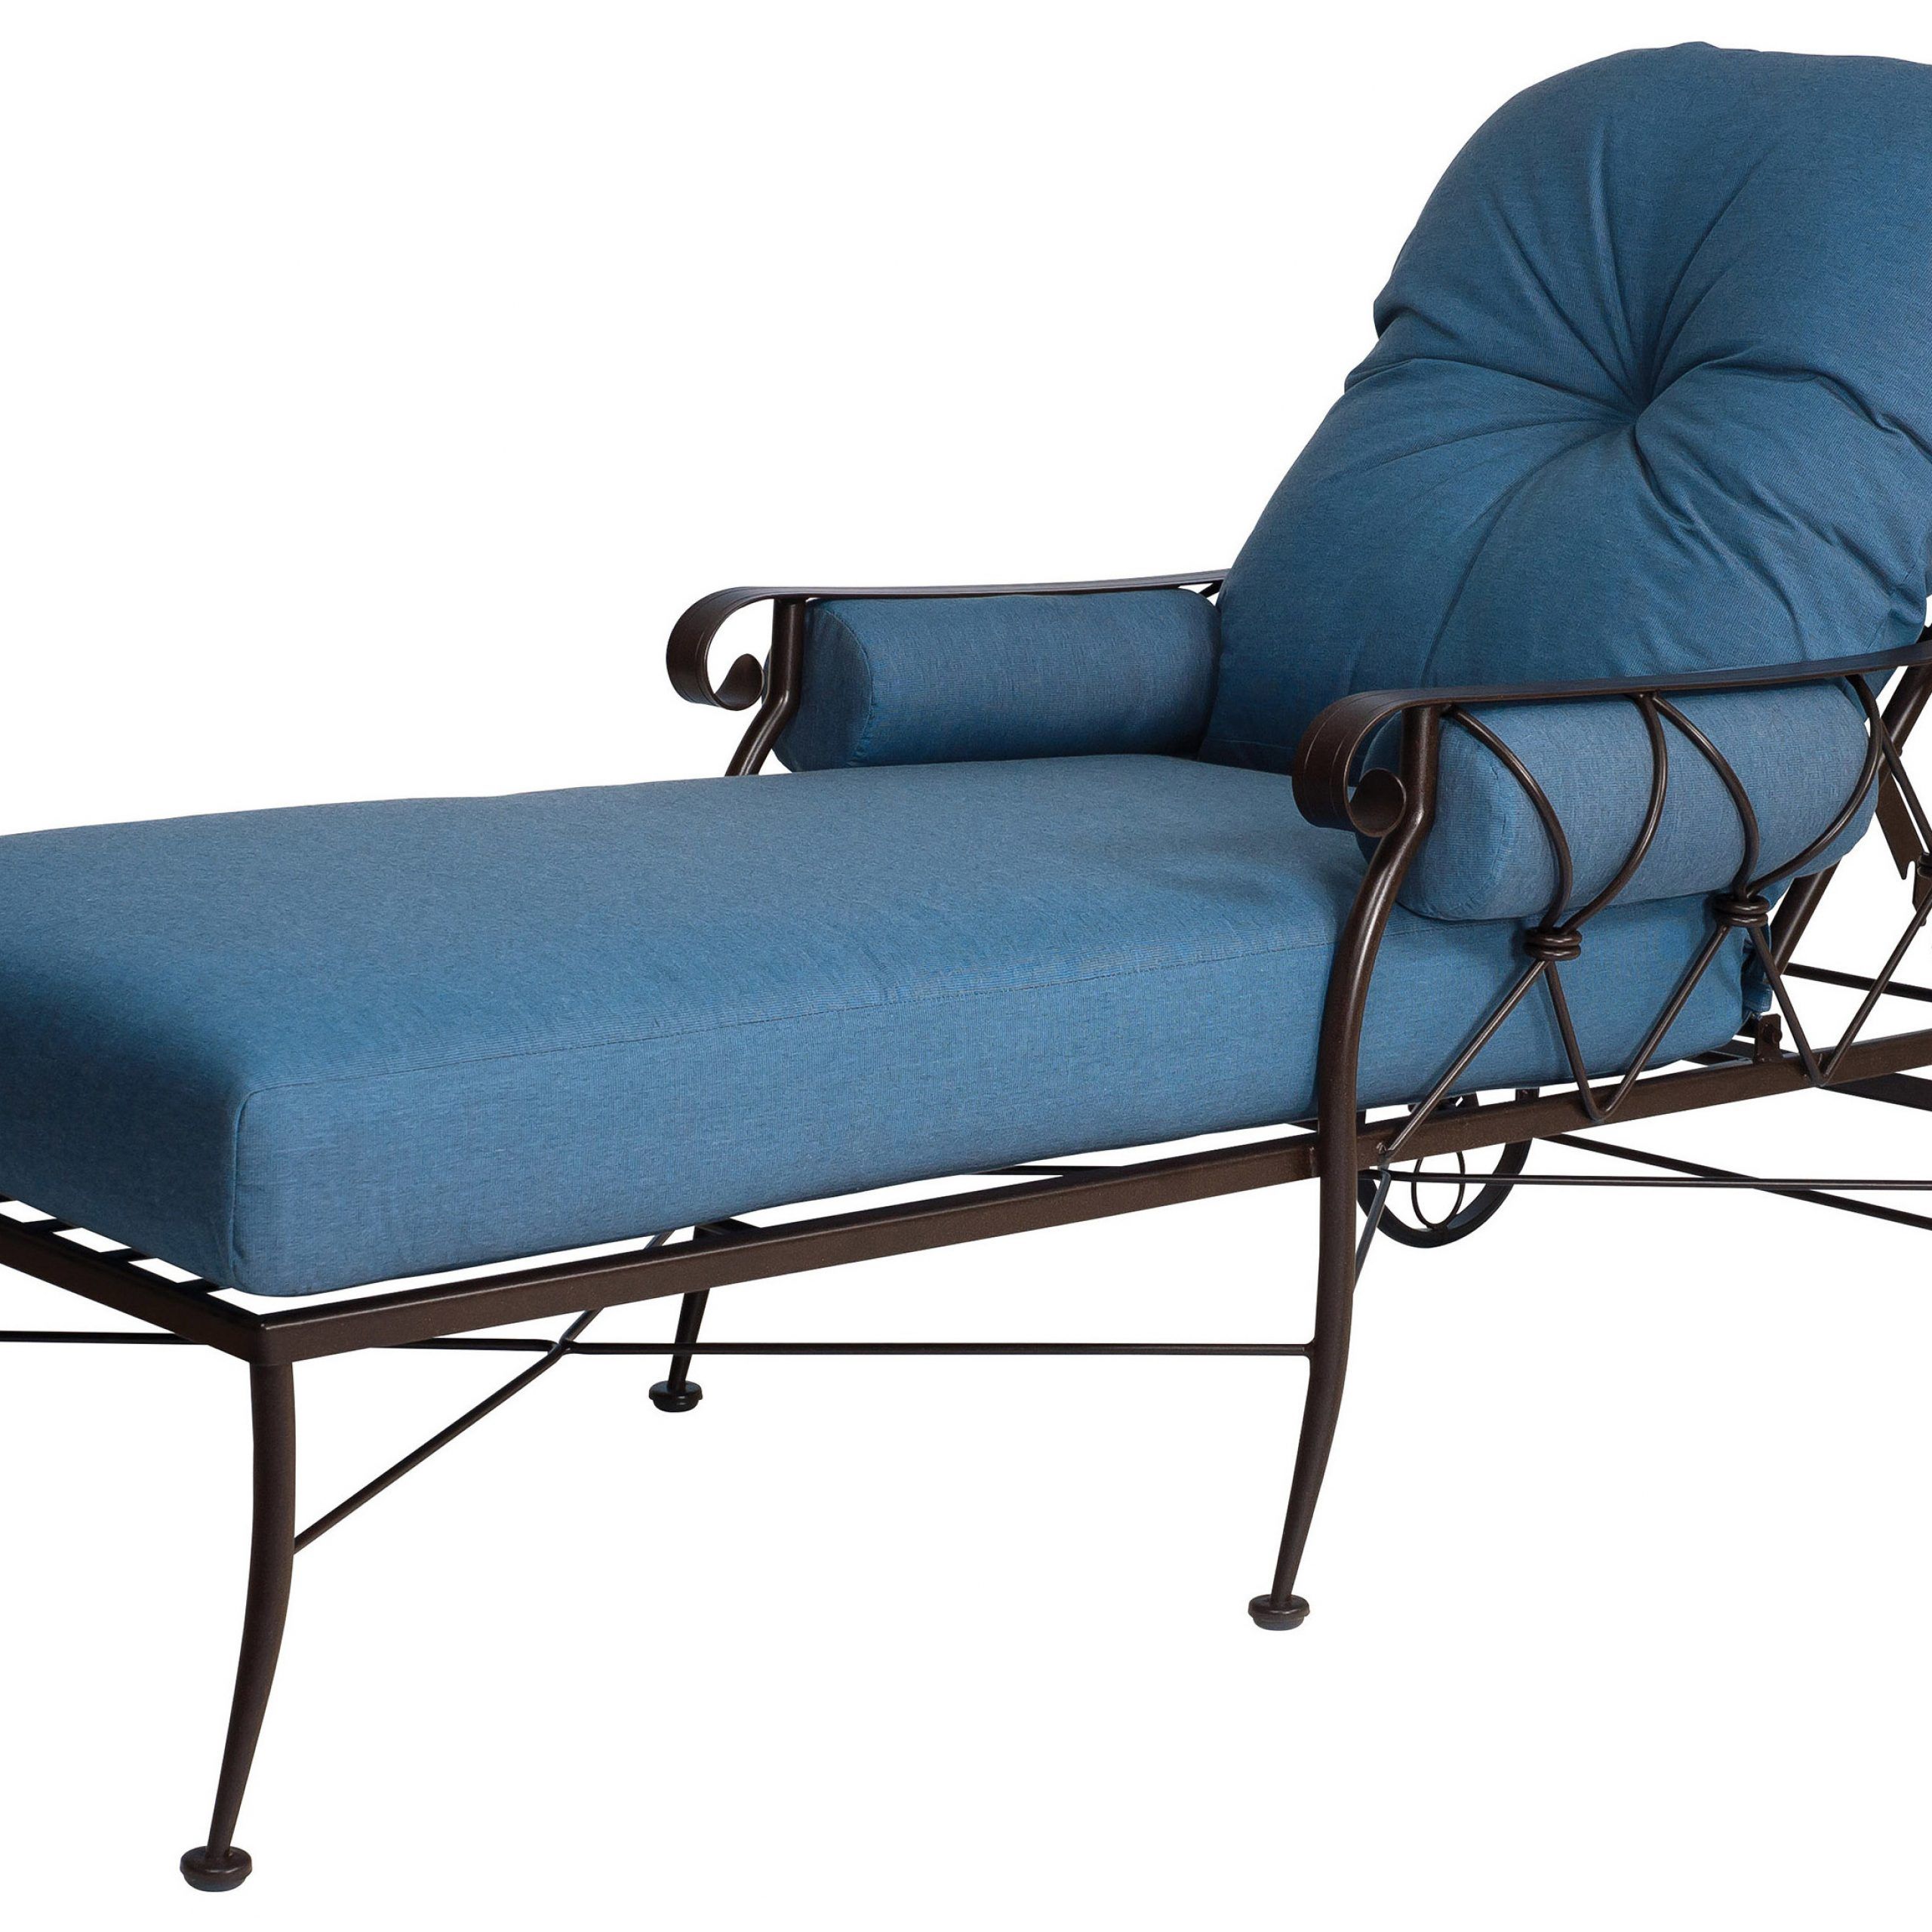 Steel Arm Outdoor Aluminum Chaise Sets With Regard To Preferred Wrought Iron Outdoor Chaise Lounge Chairs : Woodard Bradford Adjustable (View 1 of 15)